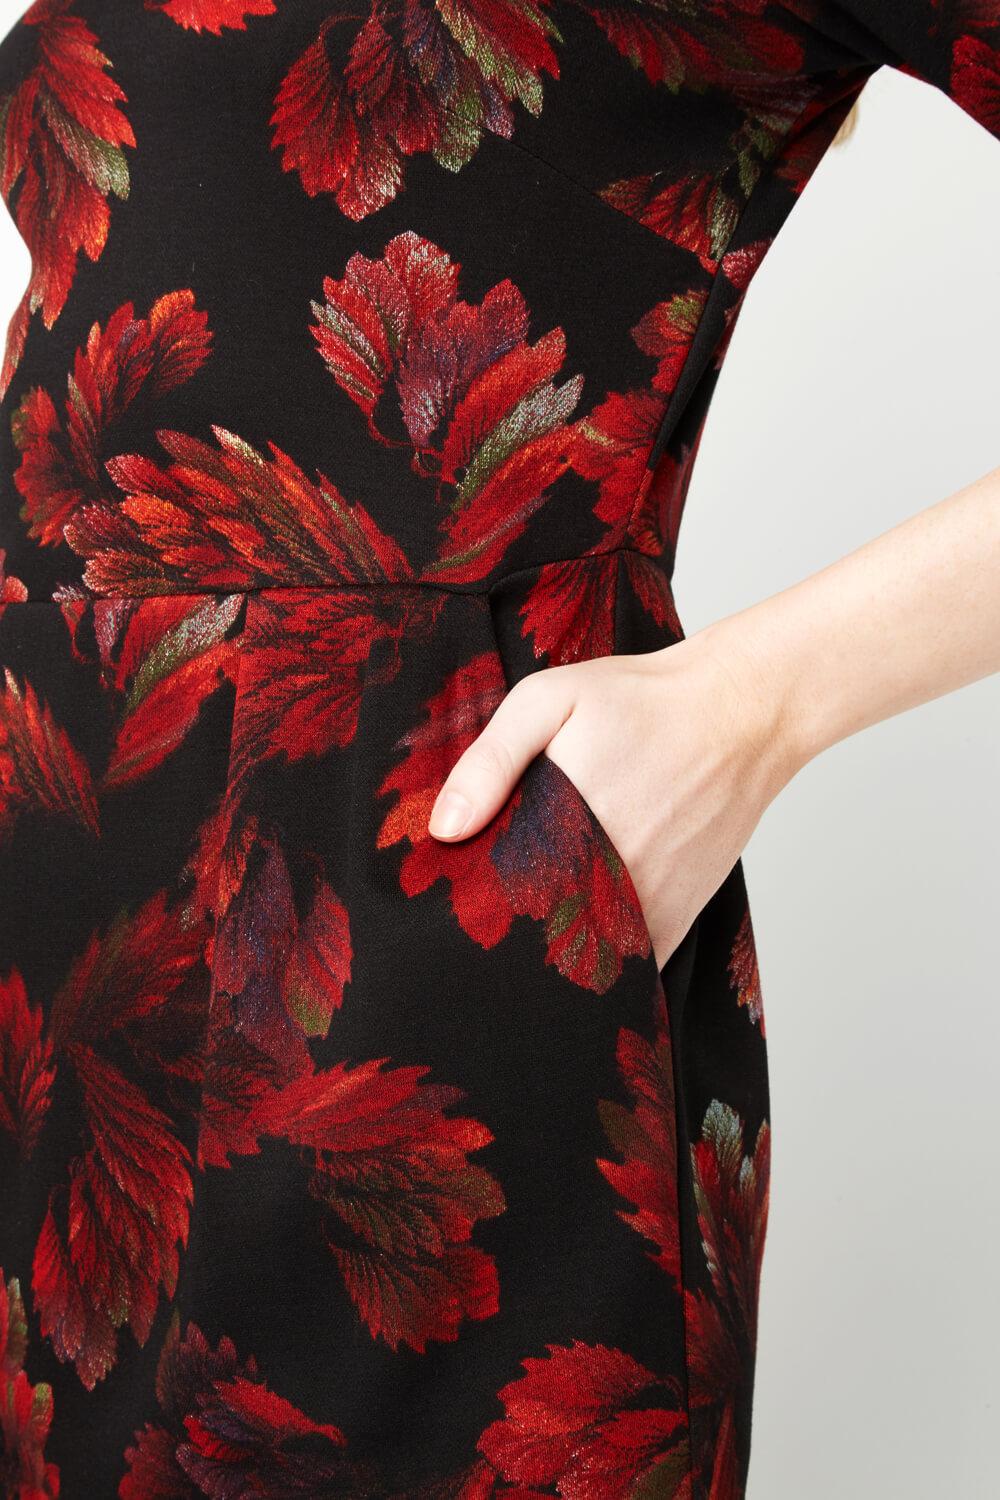 Red Floral Dress with Pockets, Image 4 of 5